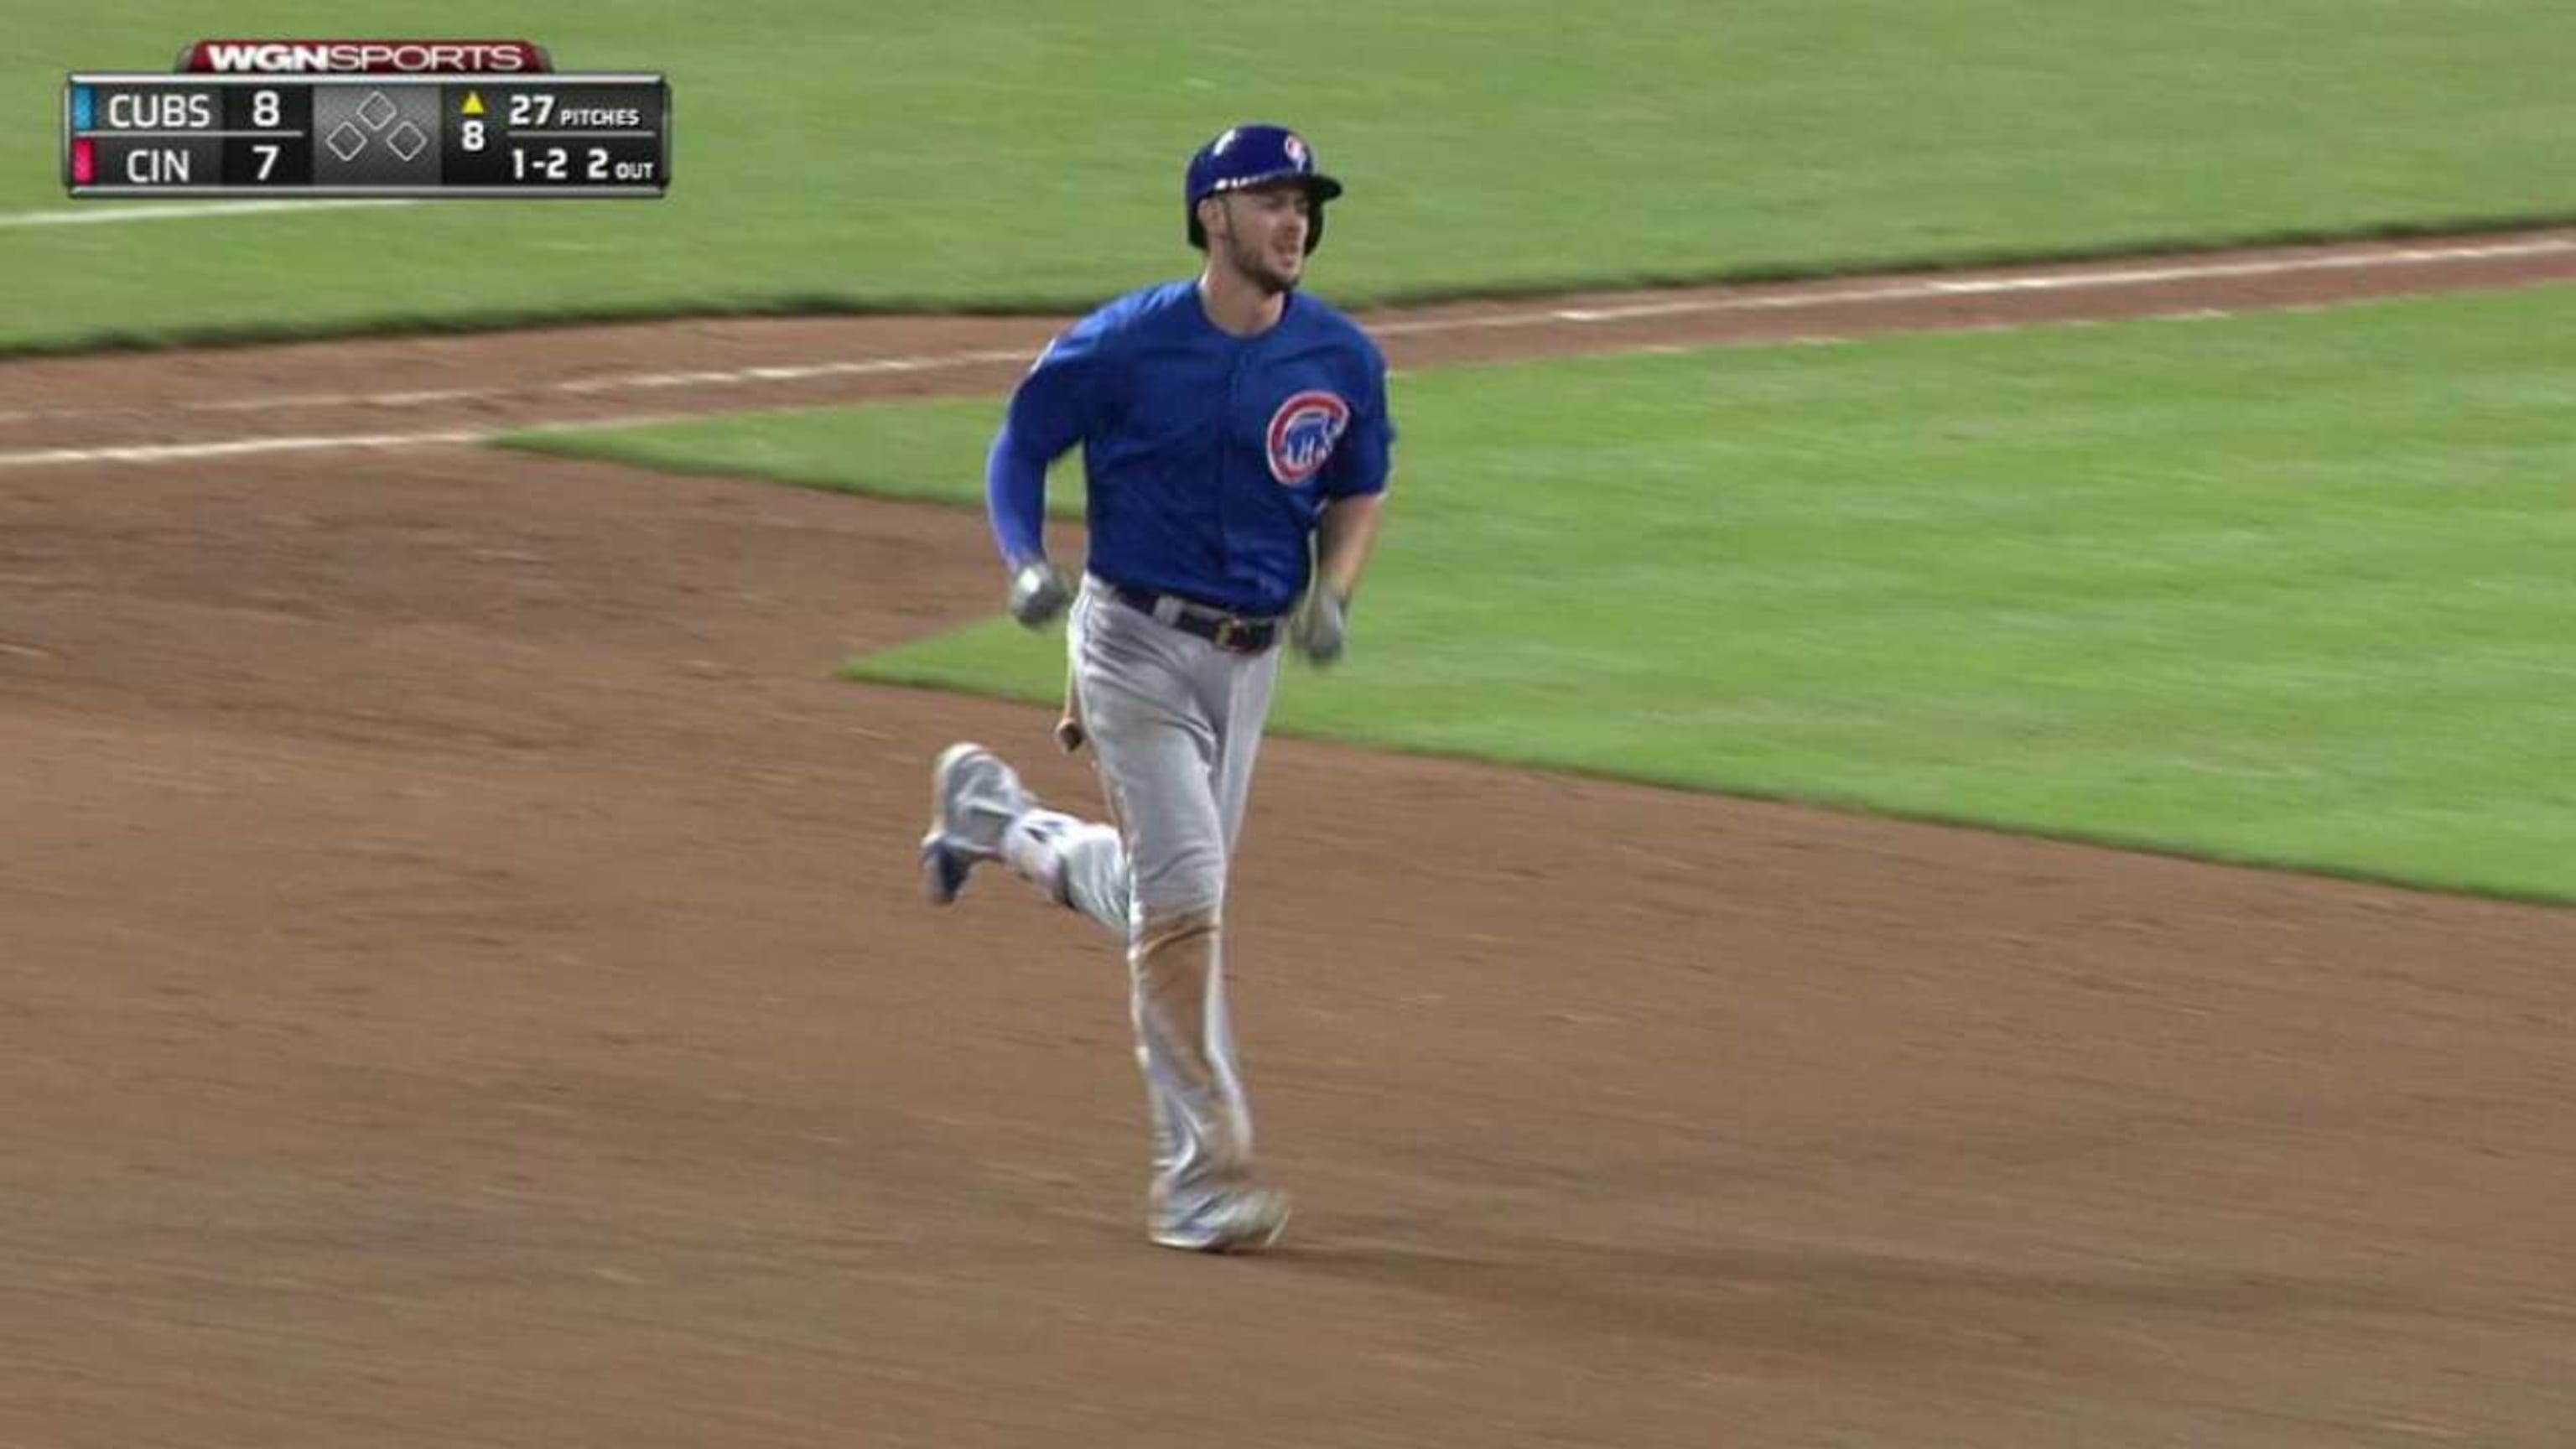 Bryant's 3-run HR gives Cubs 5-2 win over Marlins